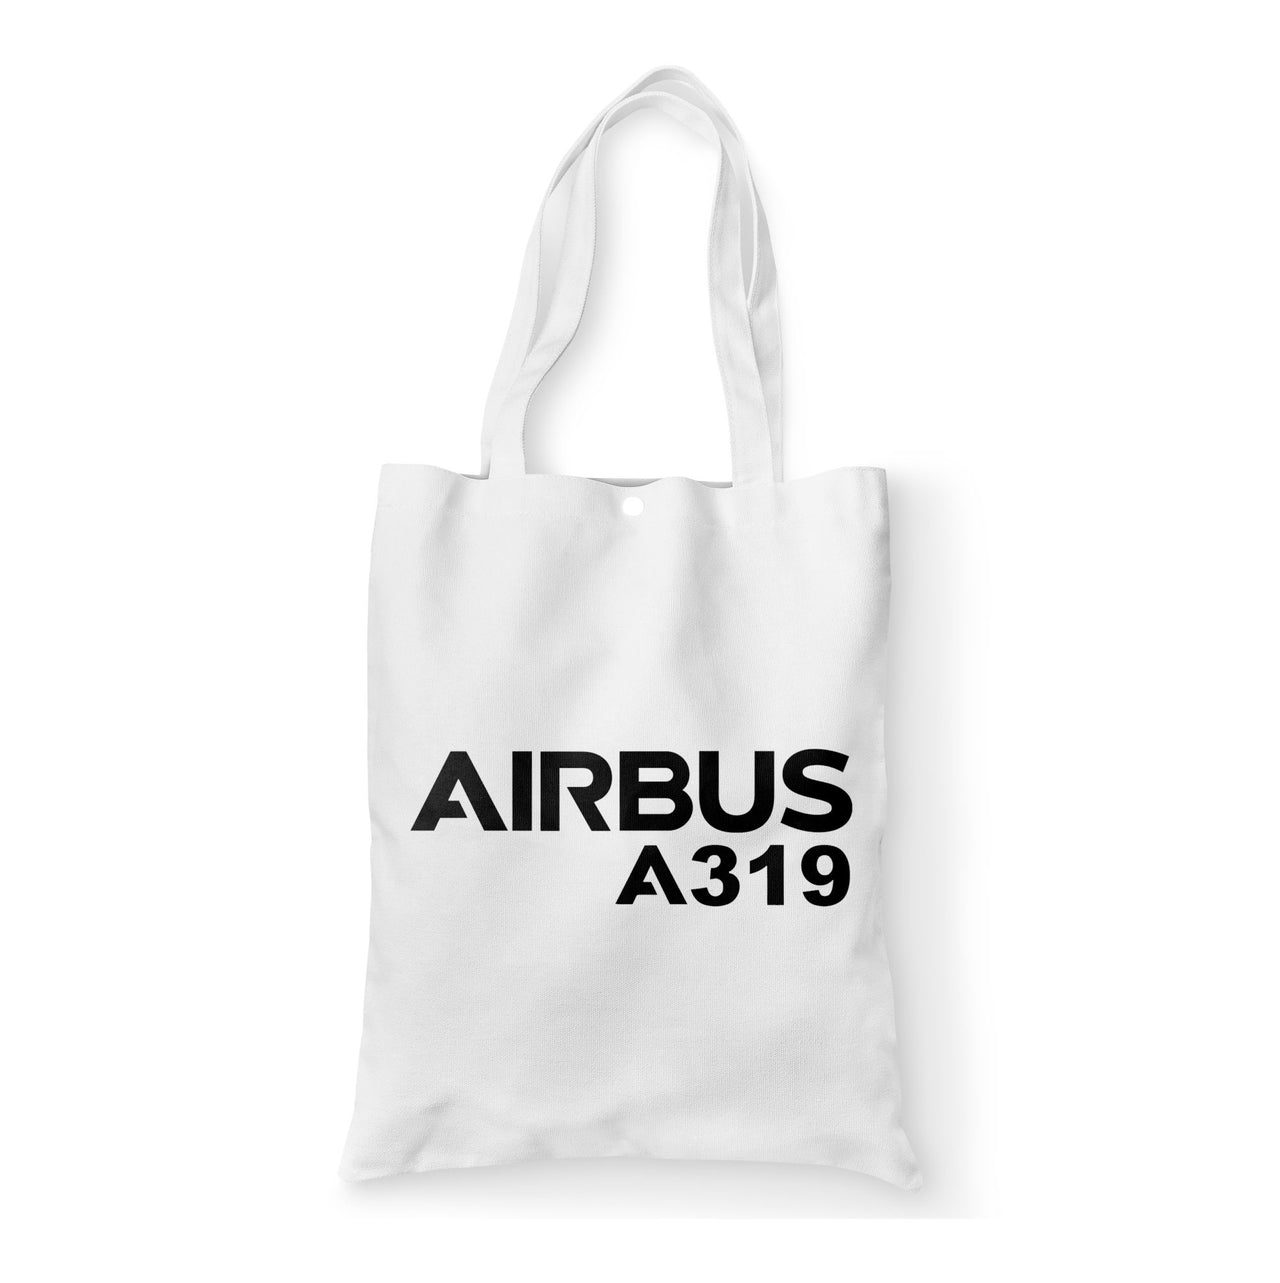 Airbus A319 & Text Designed Tote Bags